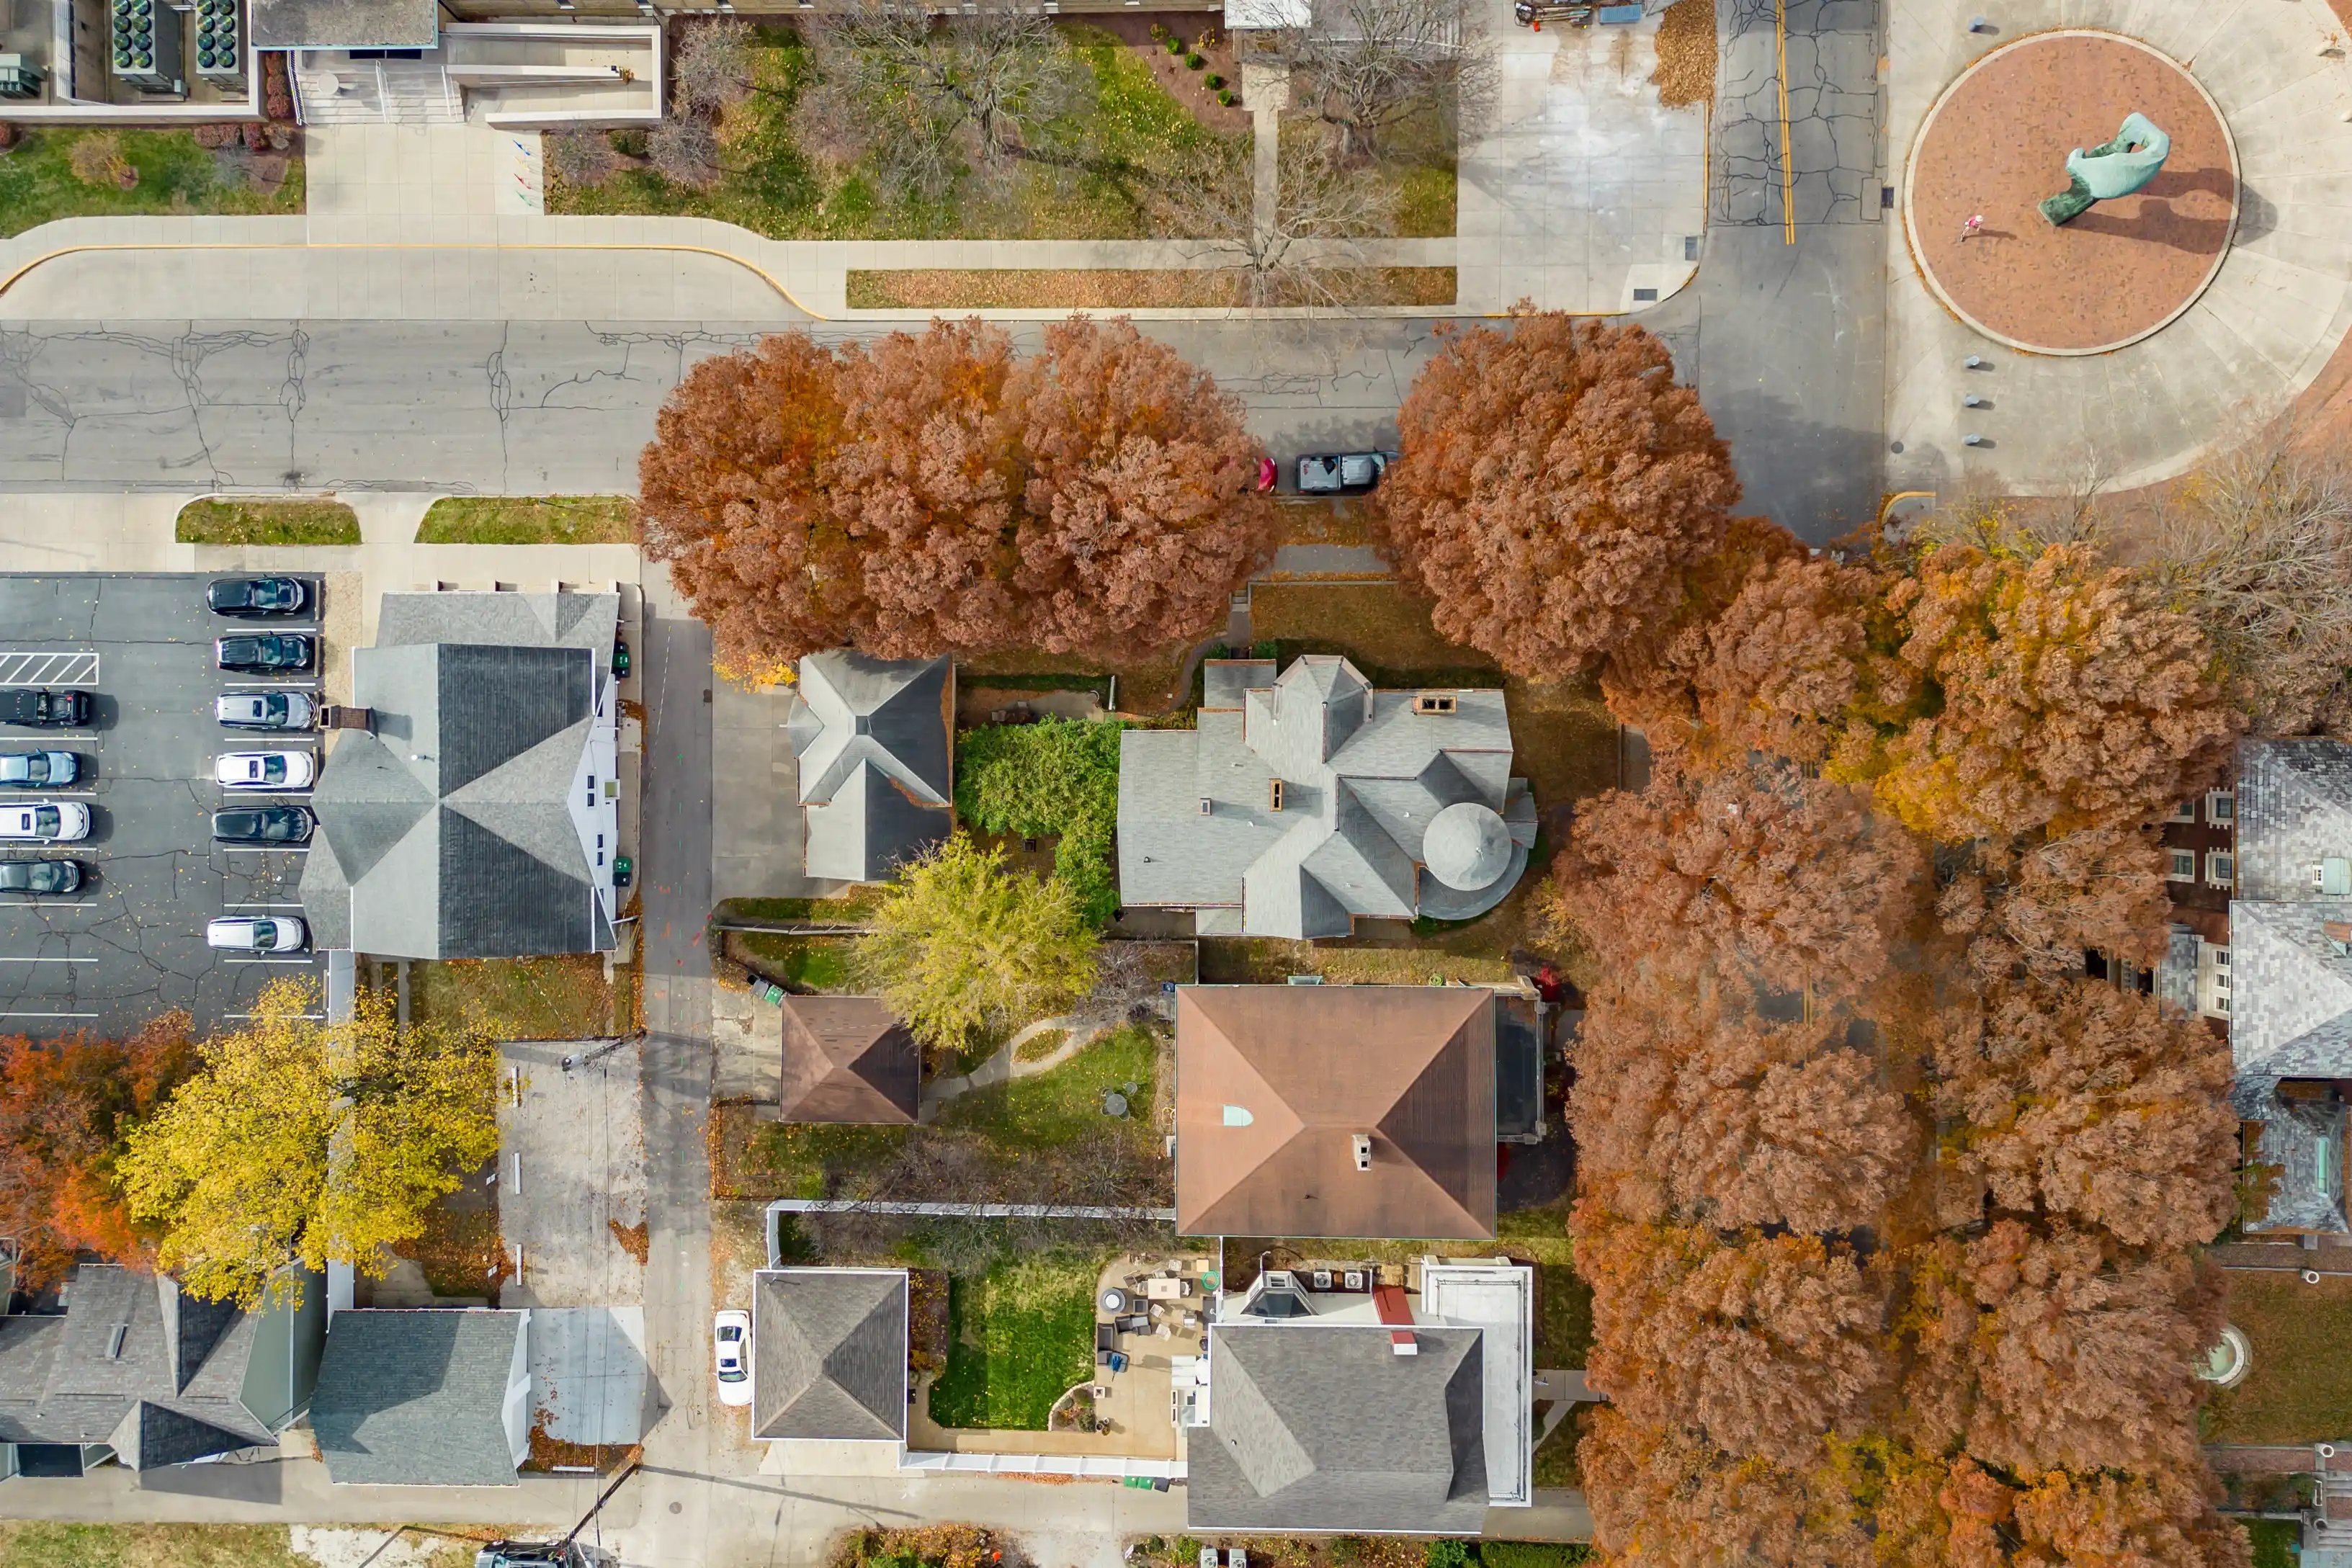 Aerial view of a residential area in autumn with colorful trees, distinctive rooftops, and parked cars.